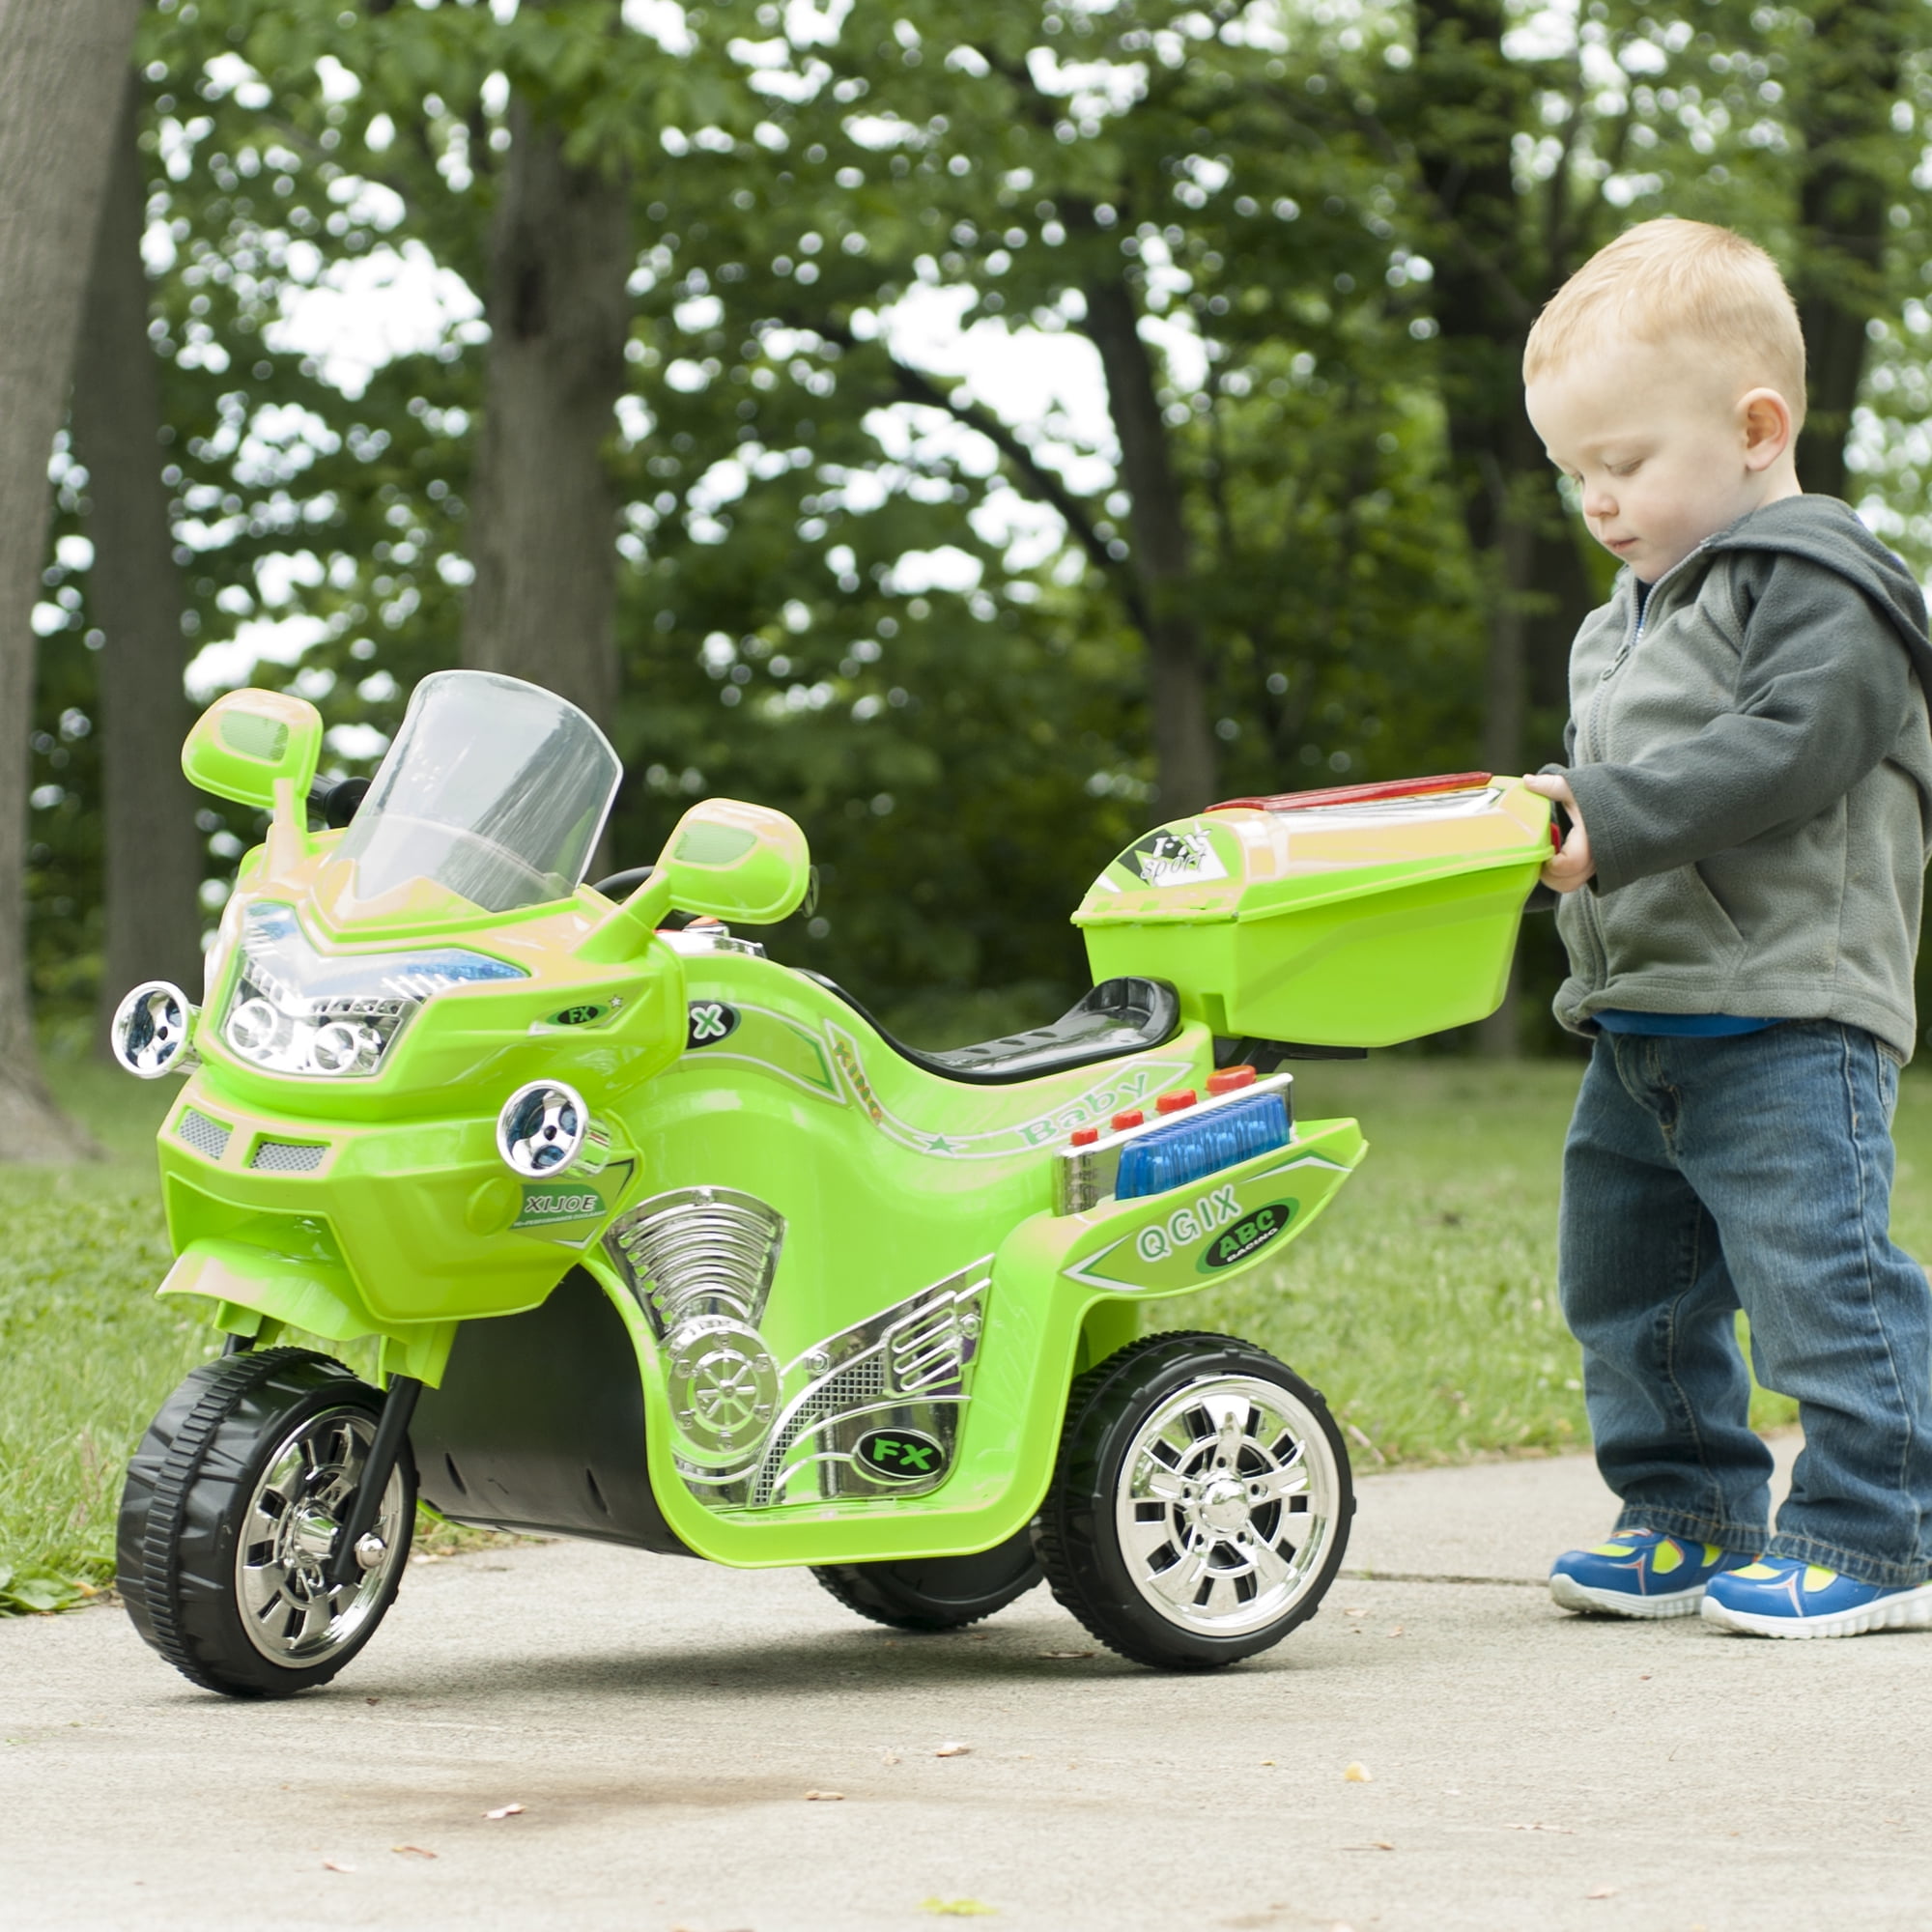 Ride on Toy 3 Wheel Motorcycle Trike for Kids by Rockin Rollers Battery PO for sale online 